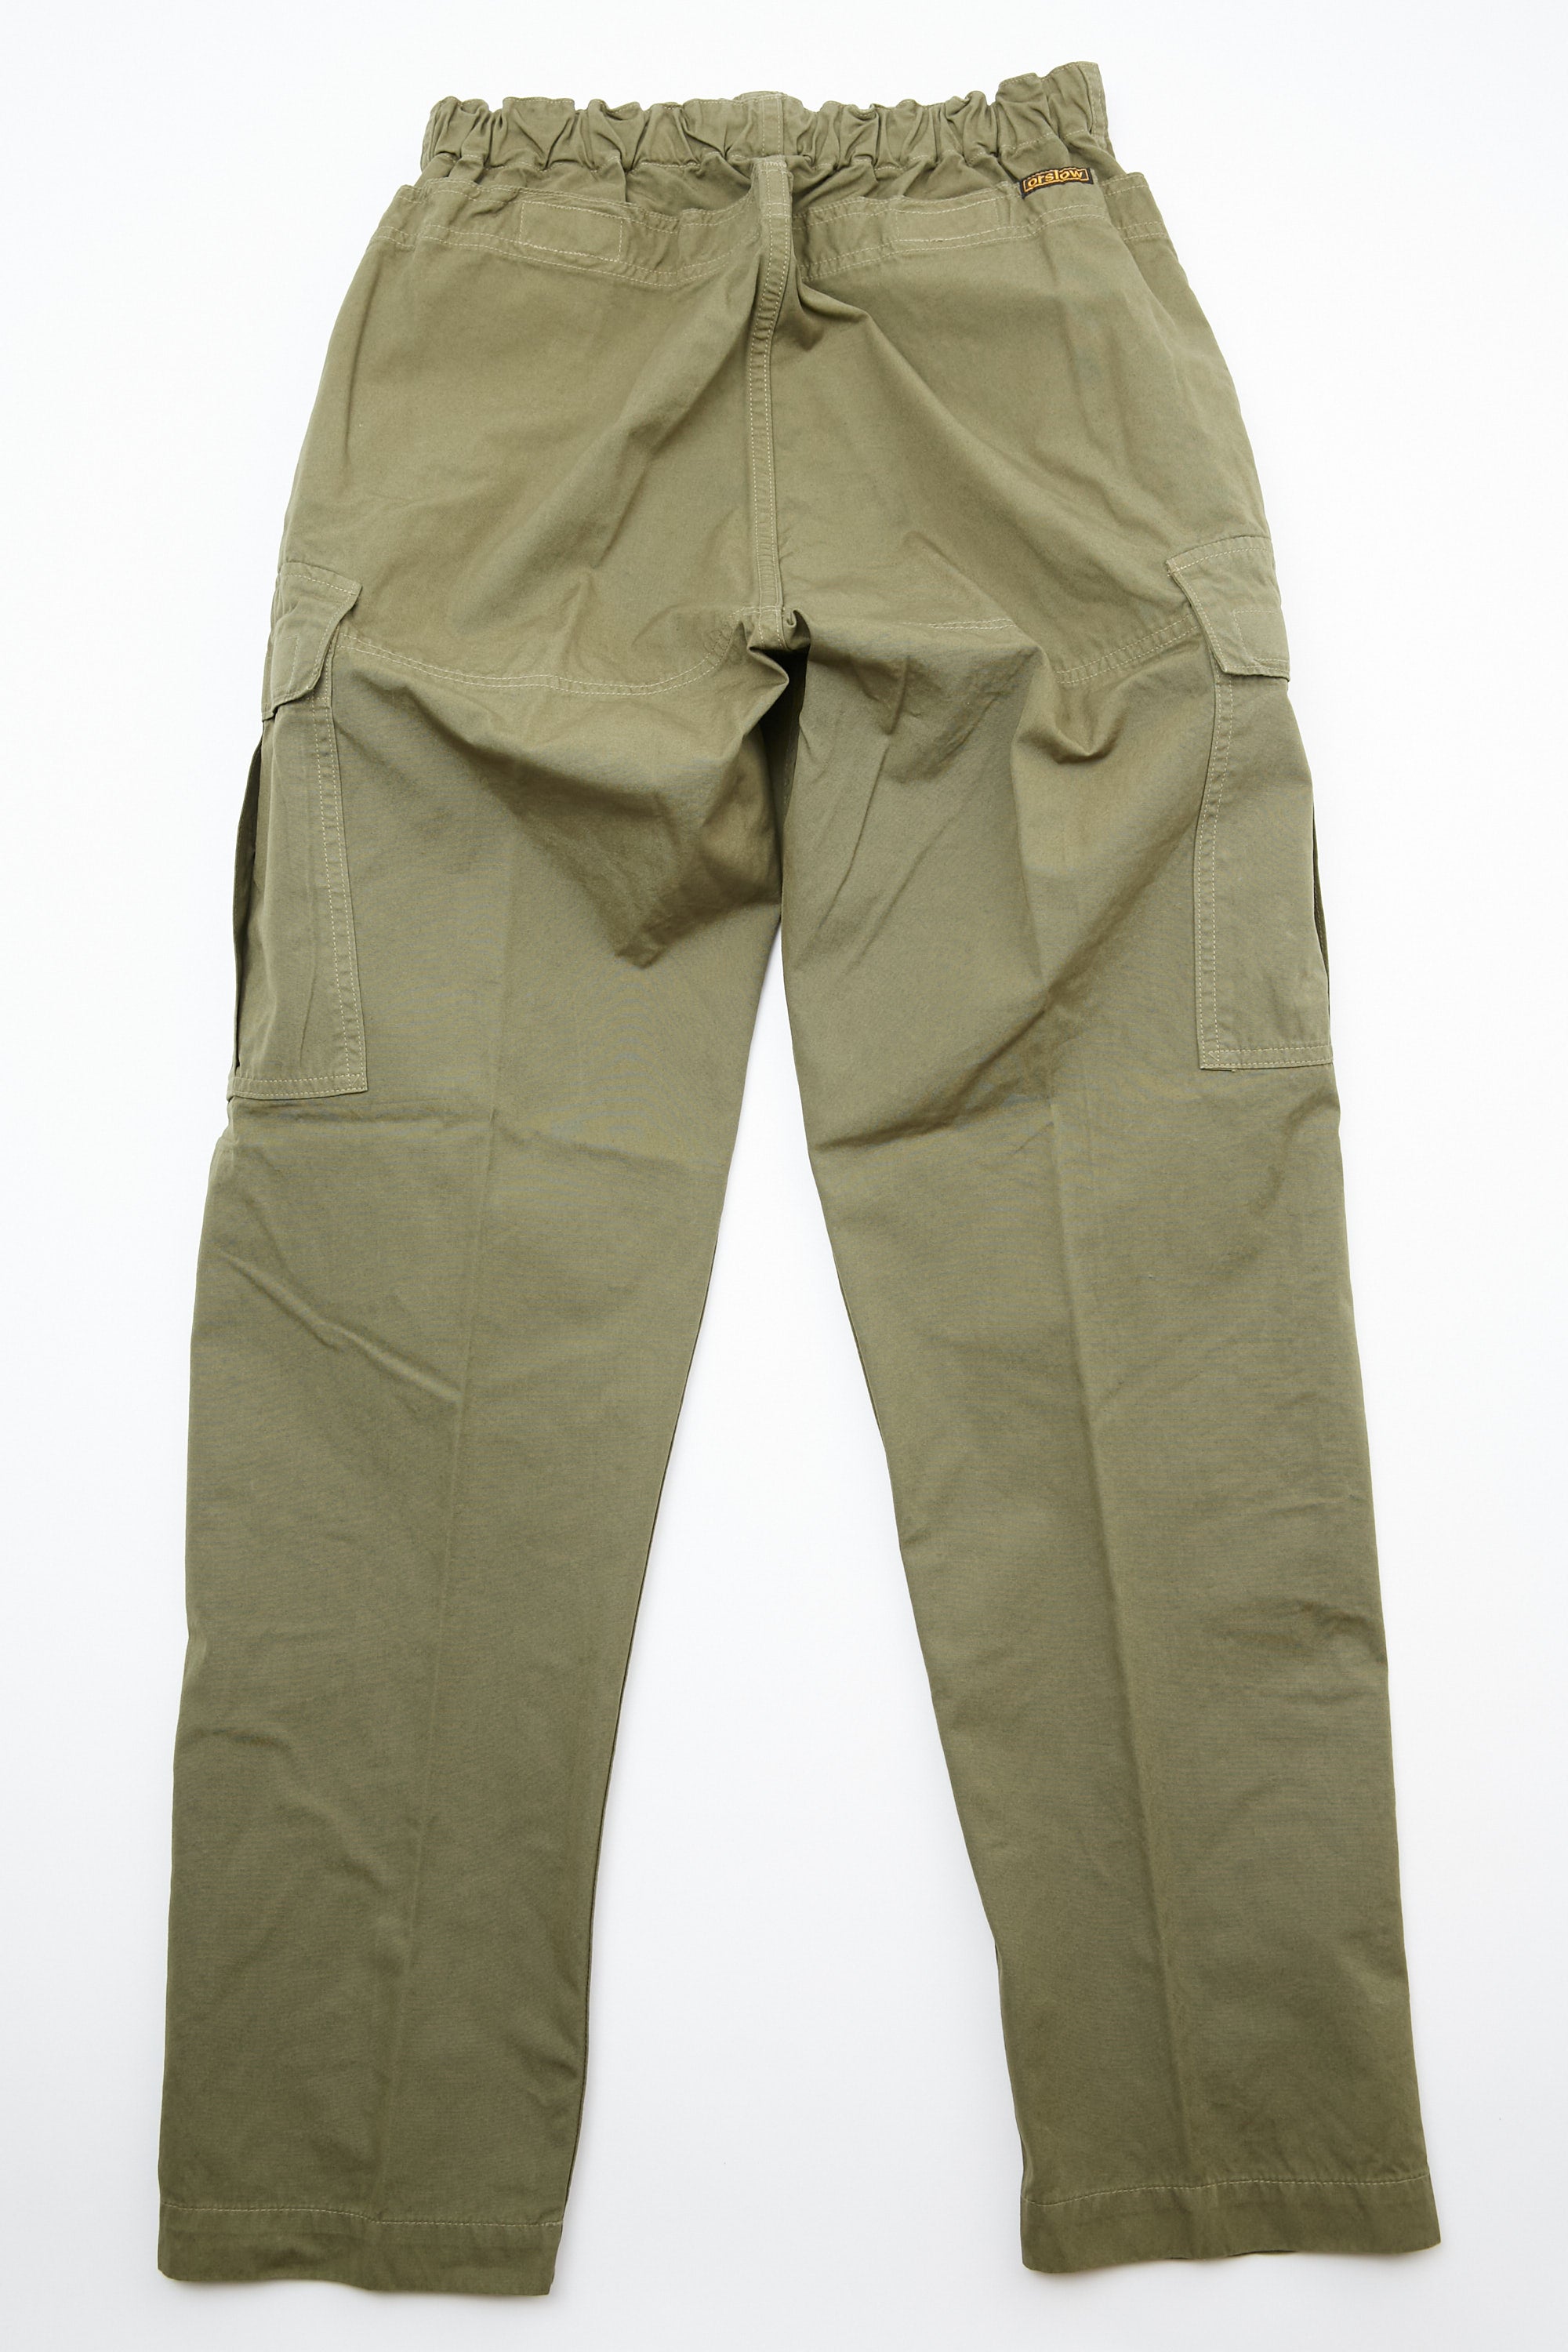 OrSlow Easy Cargo Pants - Army Green – Totem Brand Co.